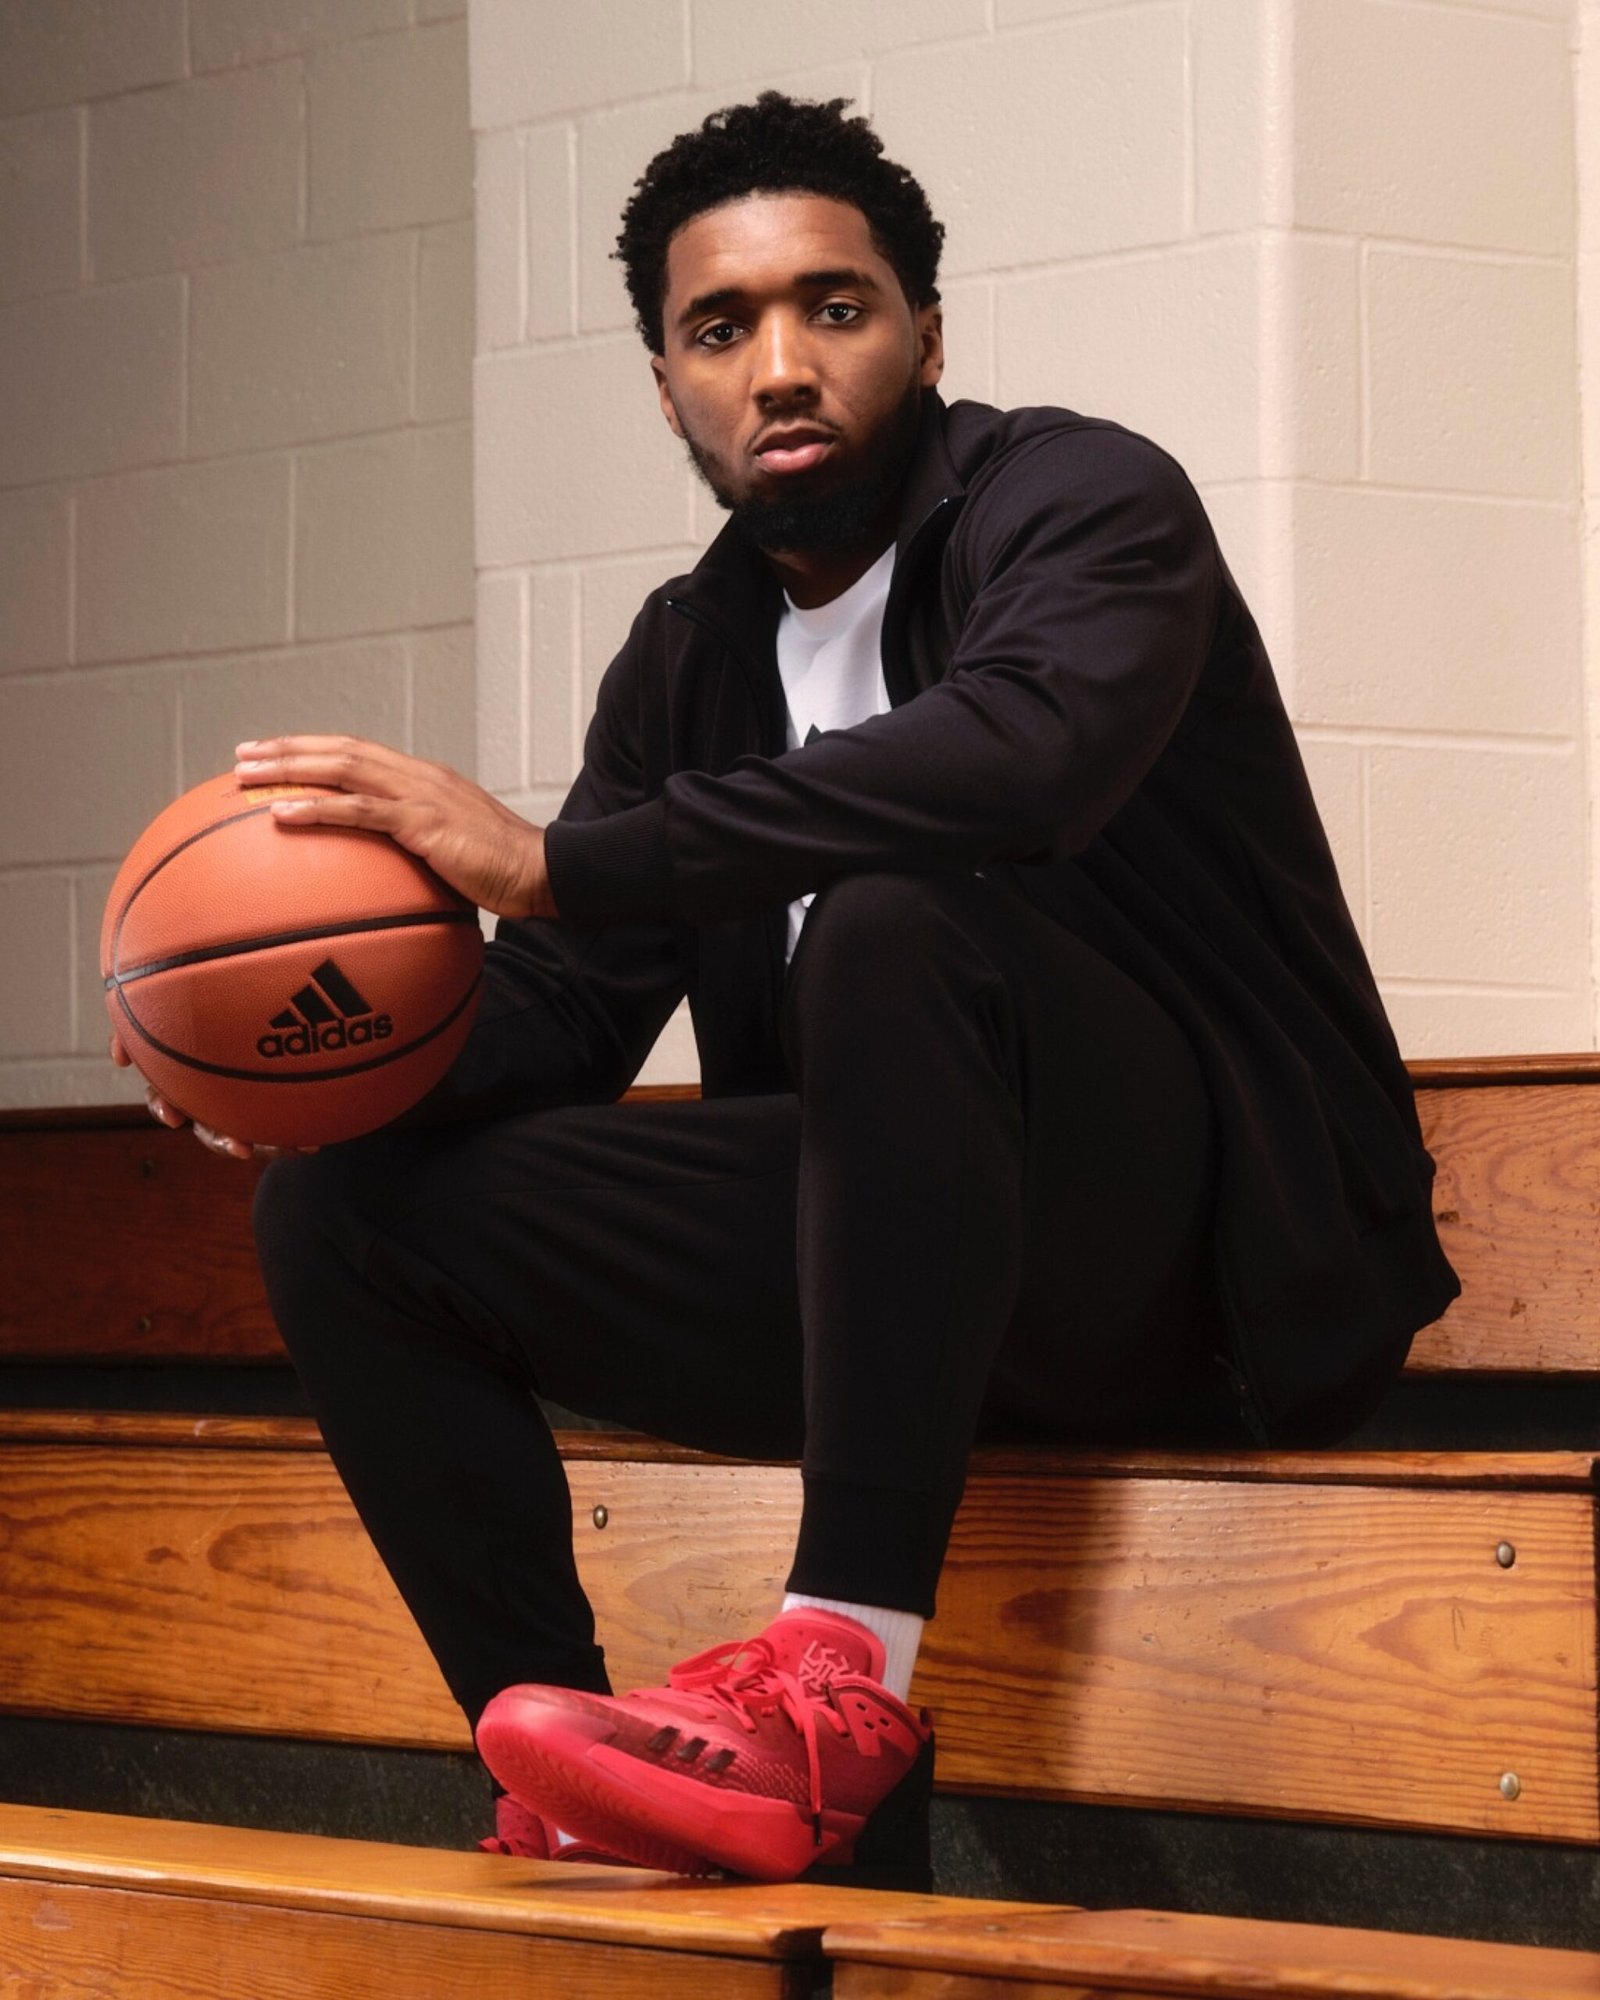 D.O.N. ISSUE #4: THE LIGHTEST SIGNATURE SILHOUETTE FROM DONOVAN MITCHELL